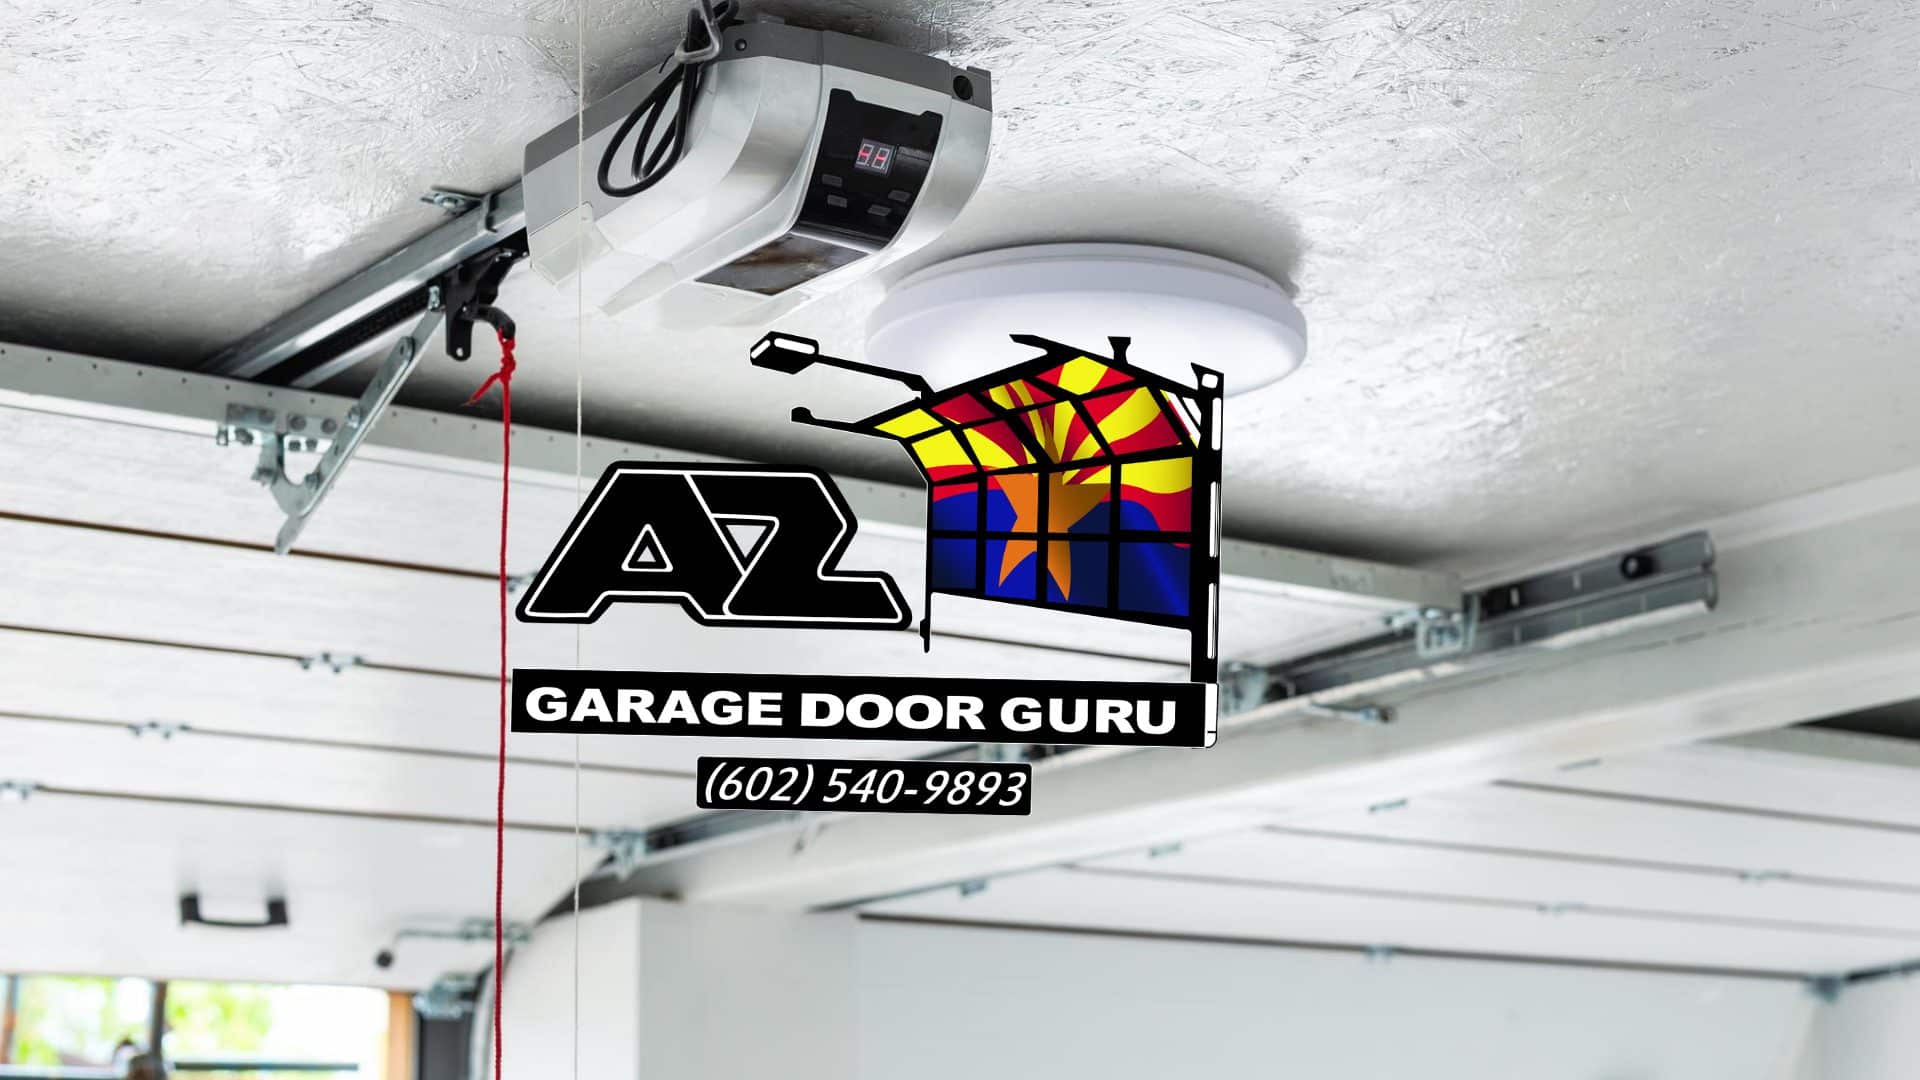 Garage Door Openers - Which One is Right For You